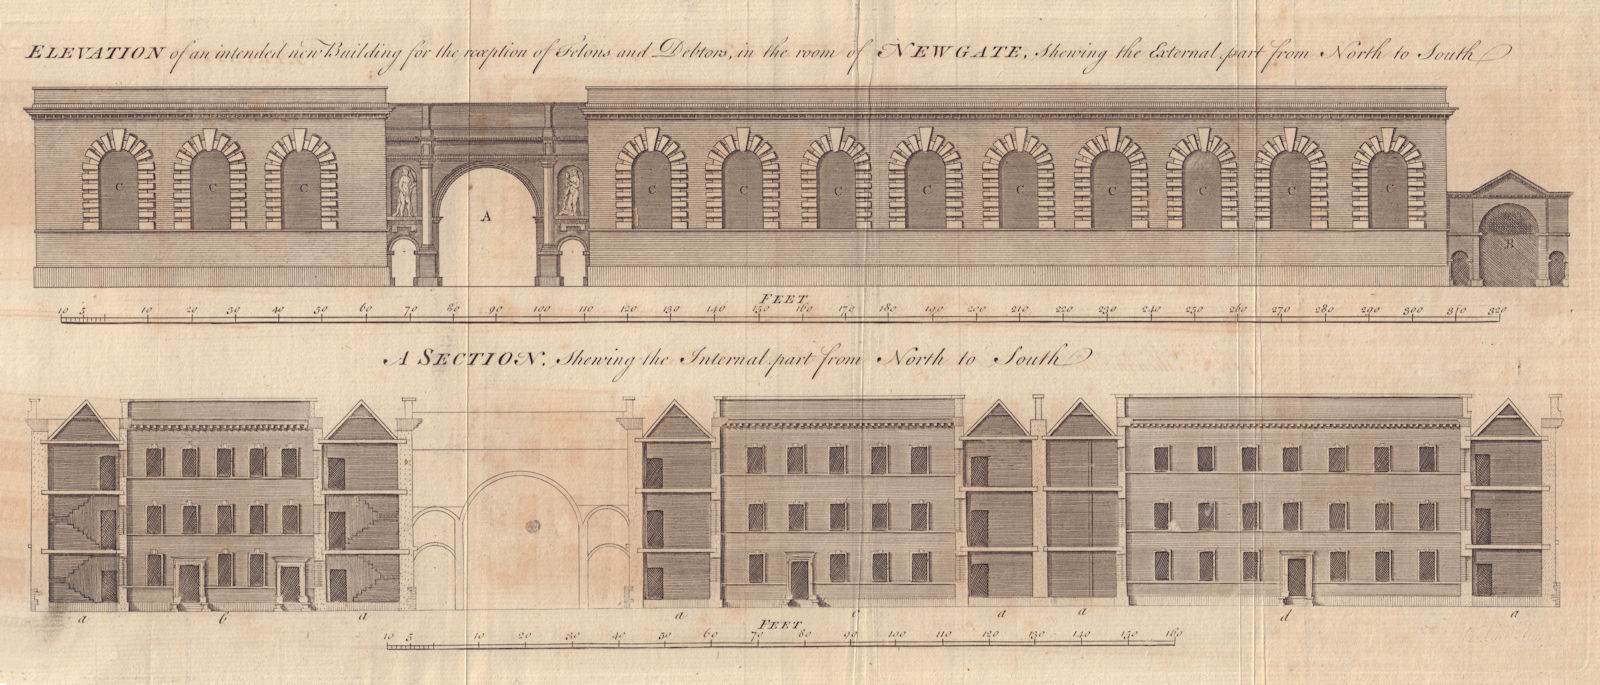 Associate Product New building for… Felons & Debtors in the room of Newgate. Jail. London 1762